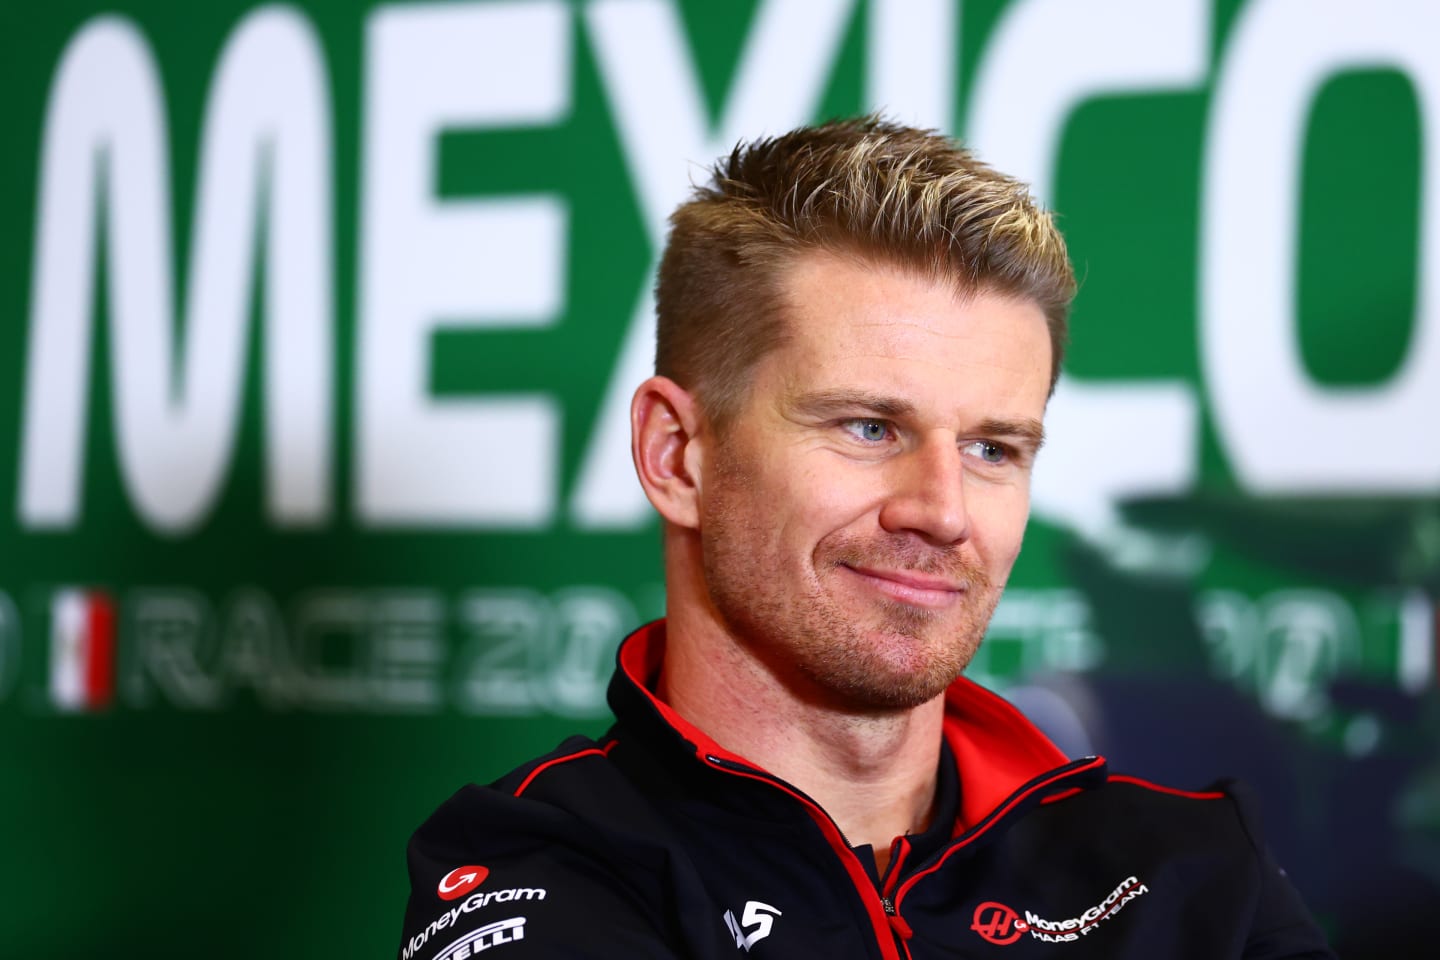 MEXICO CITY, MEXICO - OCTOBER 26: Nico Hulkenberg of Germany and Haas F1 attends the Drivers Press Conference during previews ahead of the F1 Grand Prix of Mexico at Autodromo Hermanos Rodriguez on October 26, 2023 in Mexico City, Mexico. (Photo by Dan Istitene/Getty Images)